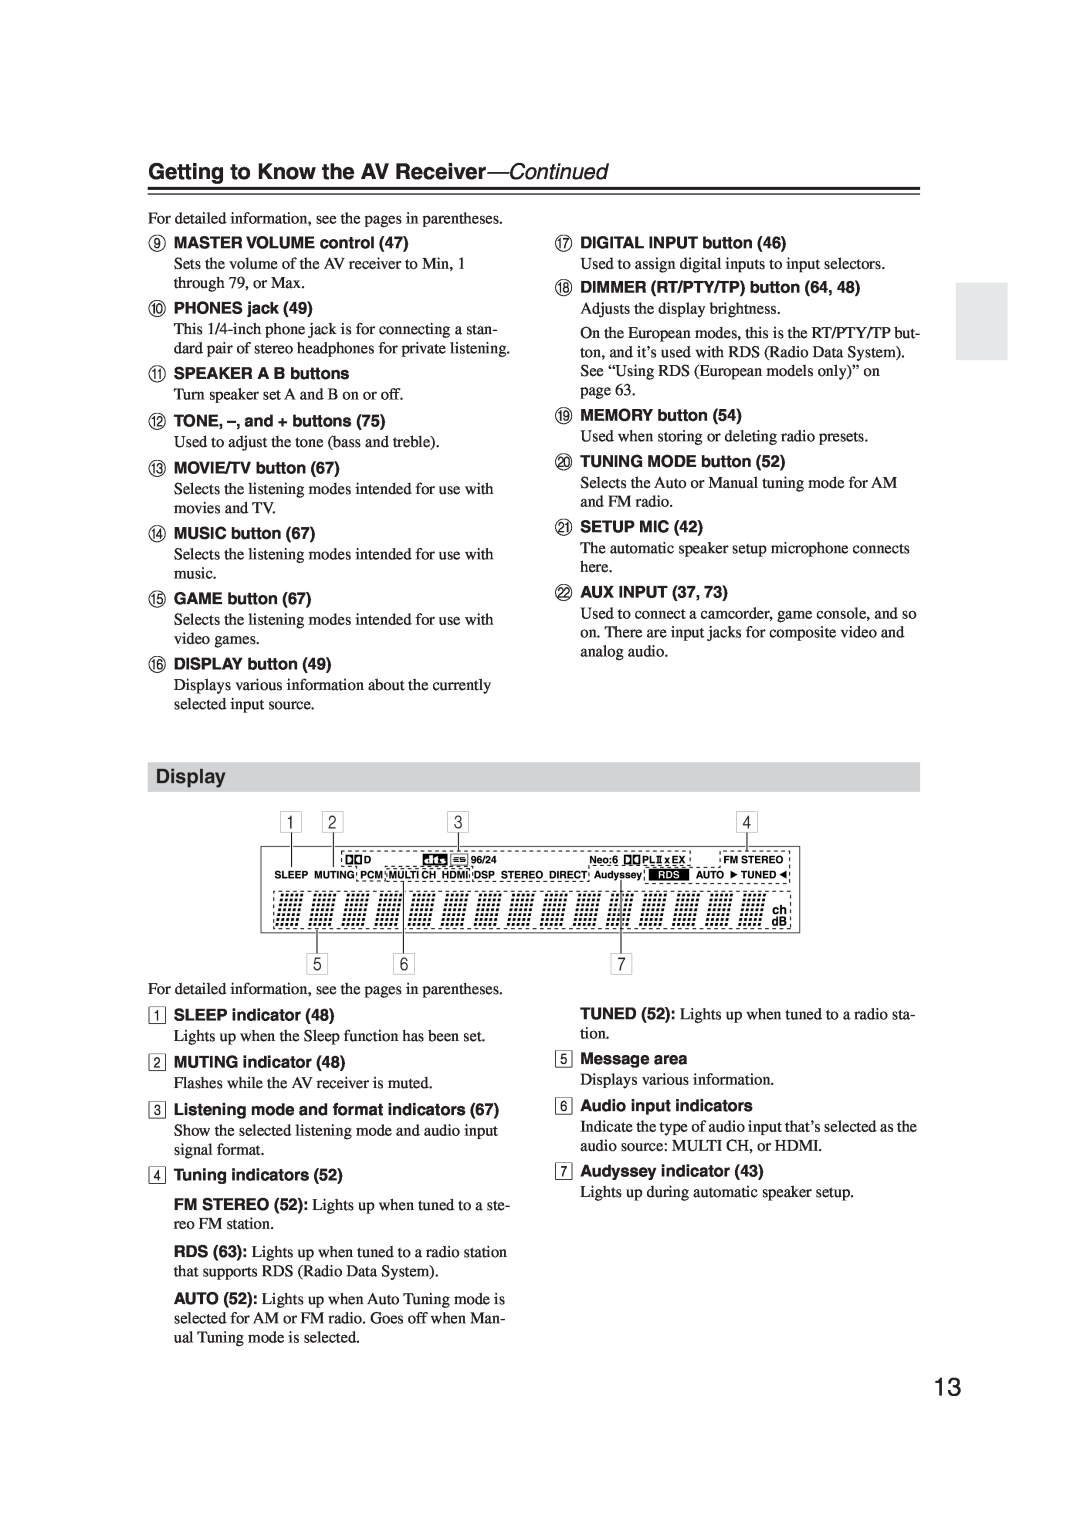 Onkyo S5100 instruction manual Getting to Know the AV Receiver—Continued, Display 